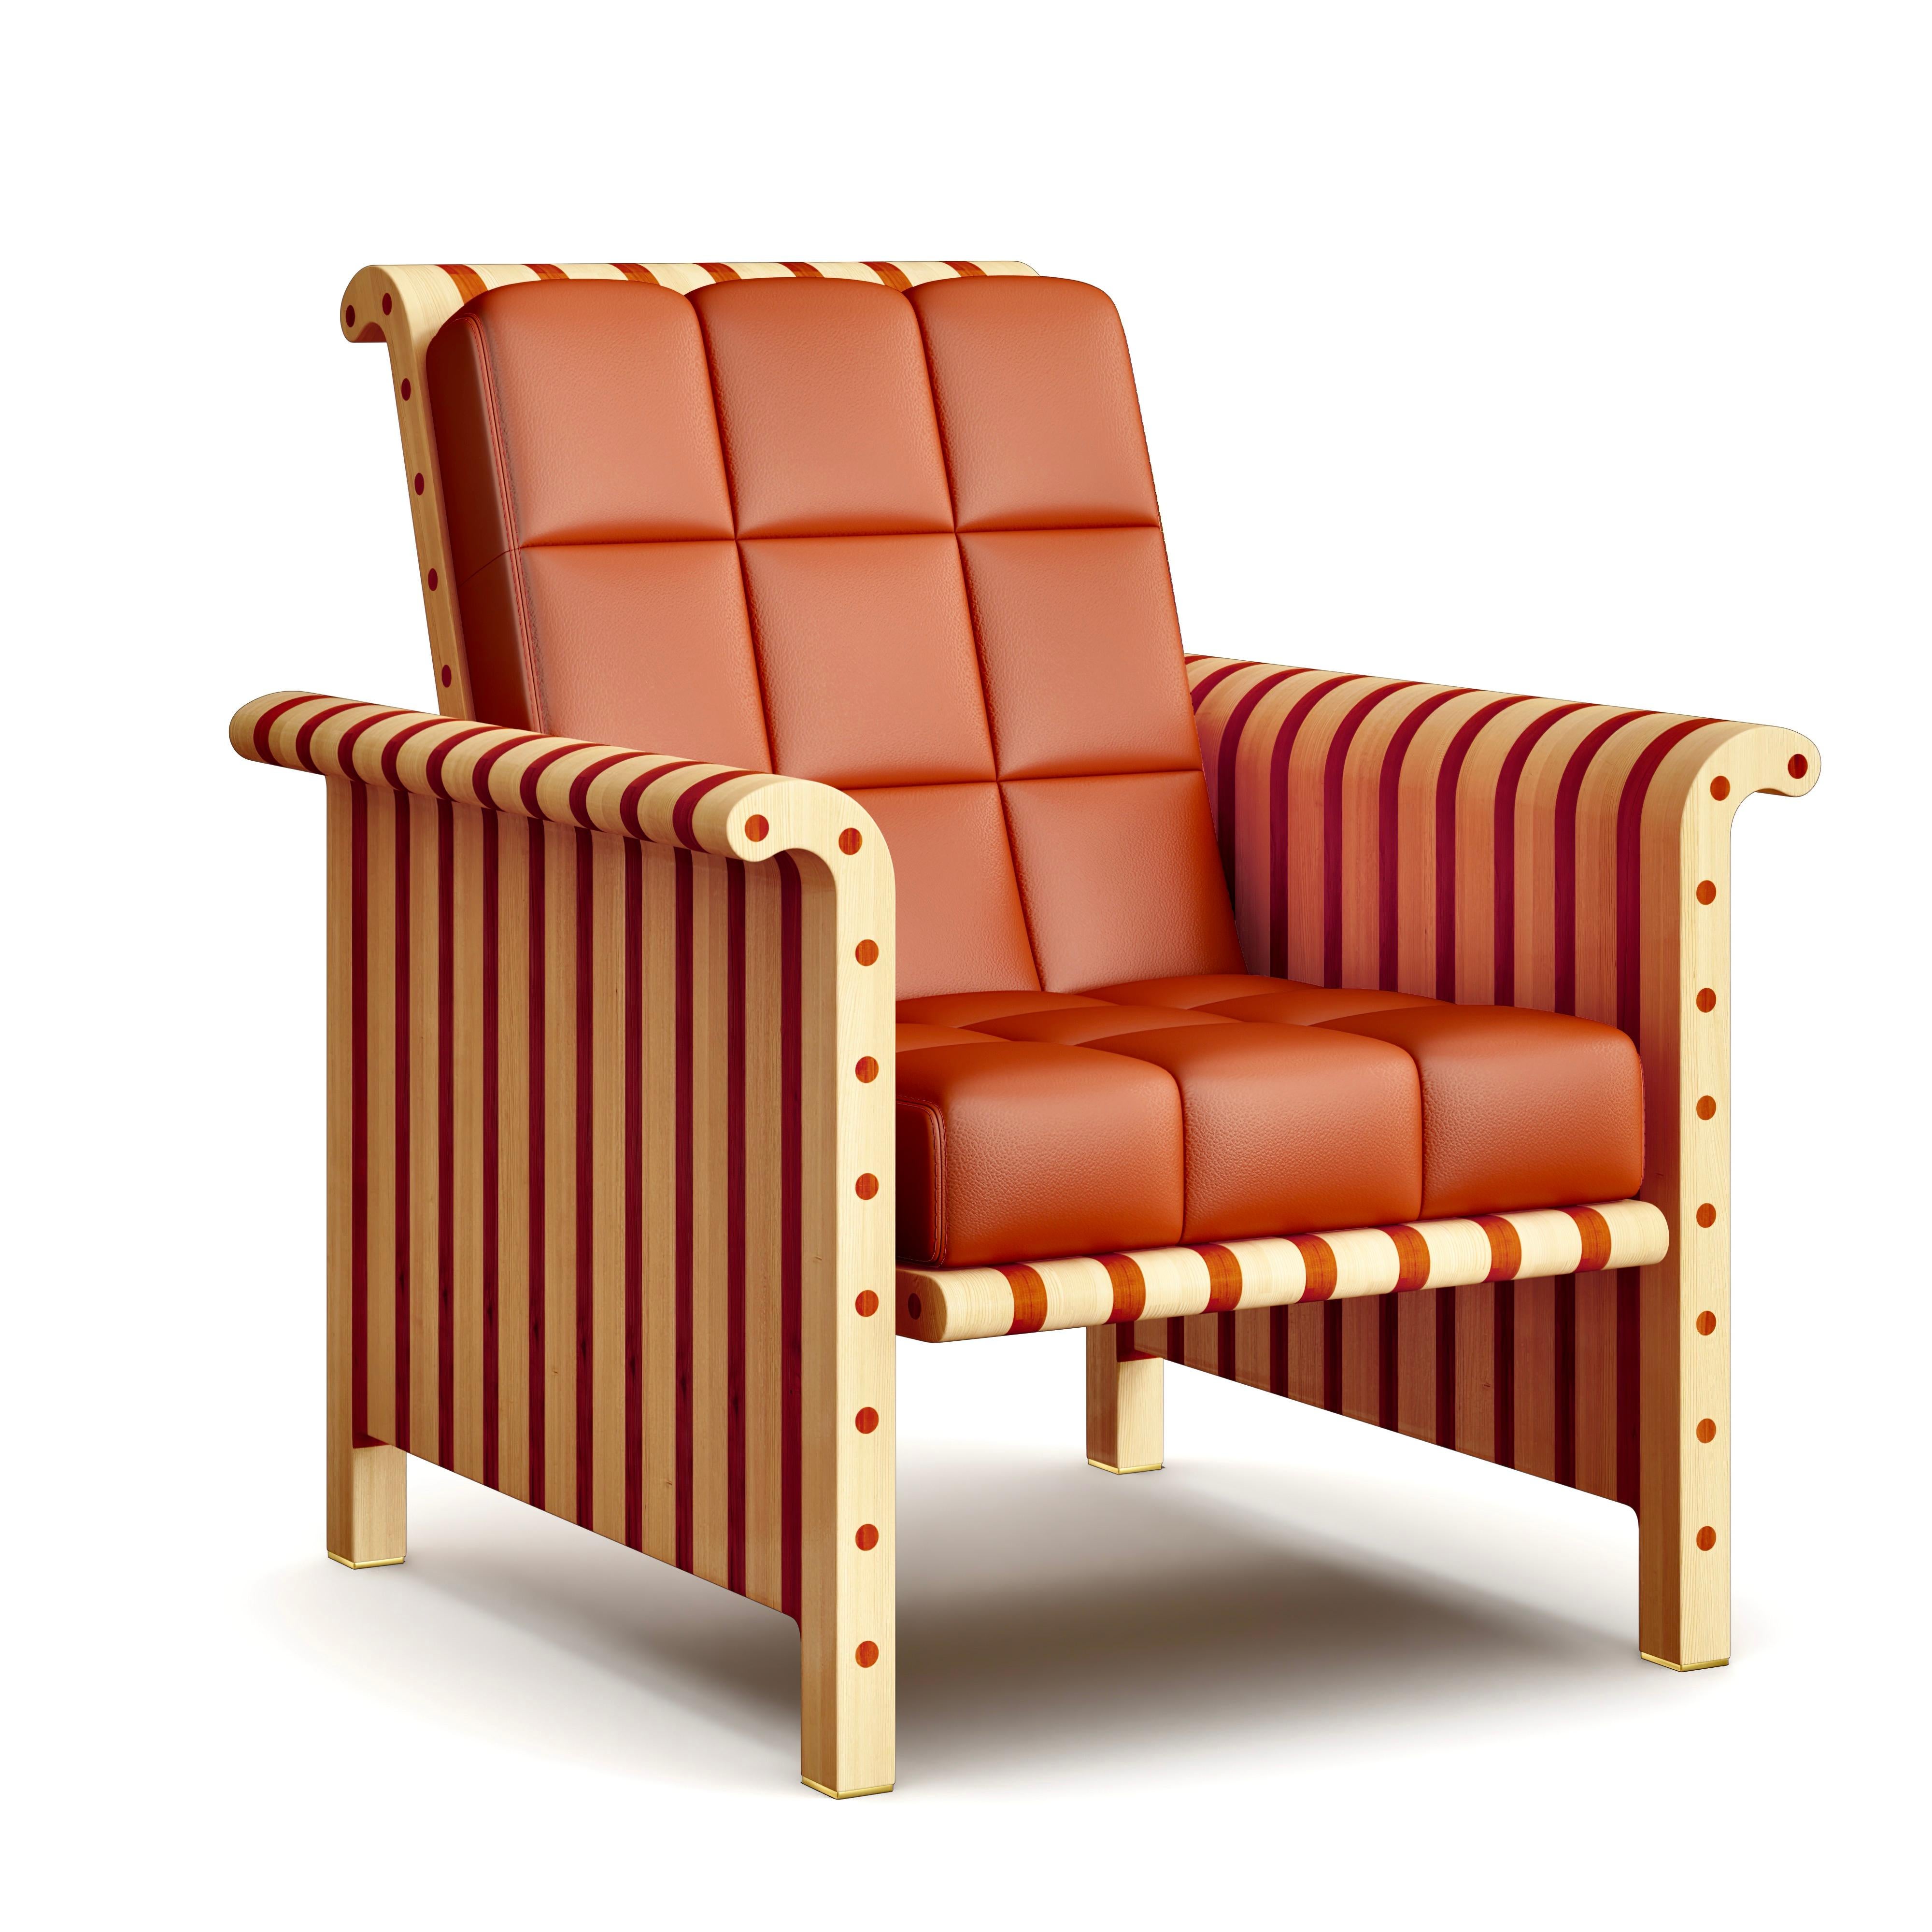 This stunning lounge chair is part of the Striped Series by Troy Smith Studio.

This lounge chair is unique, original, and 100% crafted by hand out of solid maple wood from North America and Padauk sourced from Africa. It comes with a hand-sewn seat